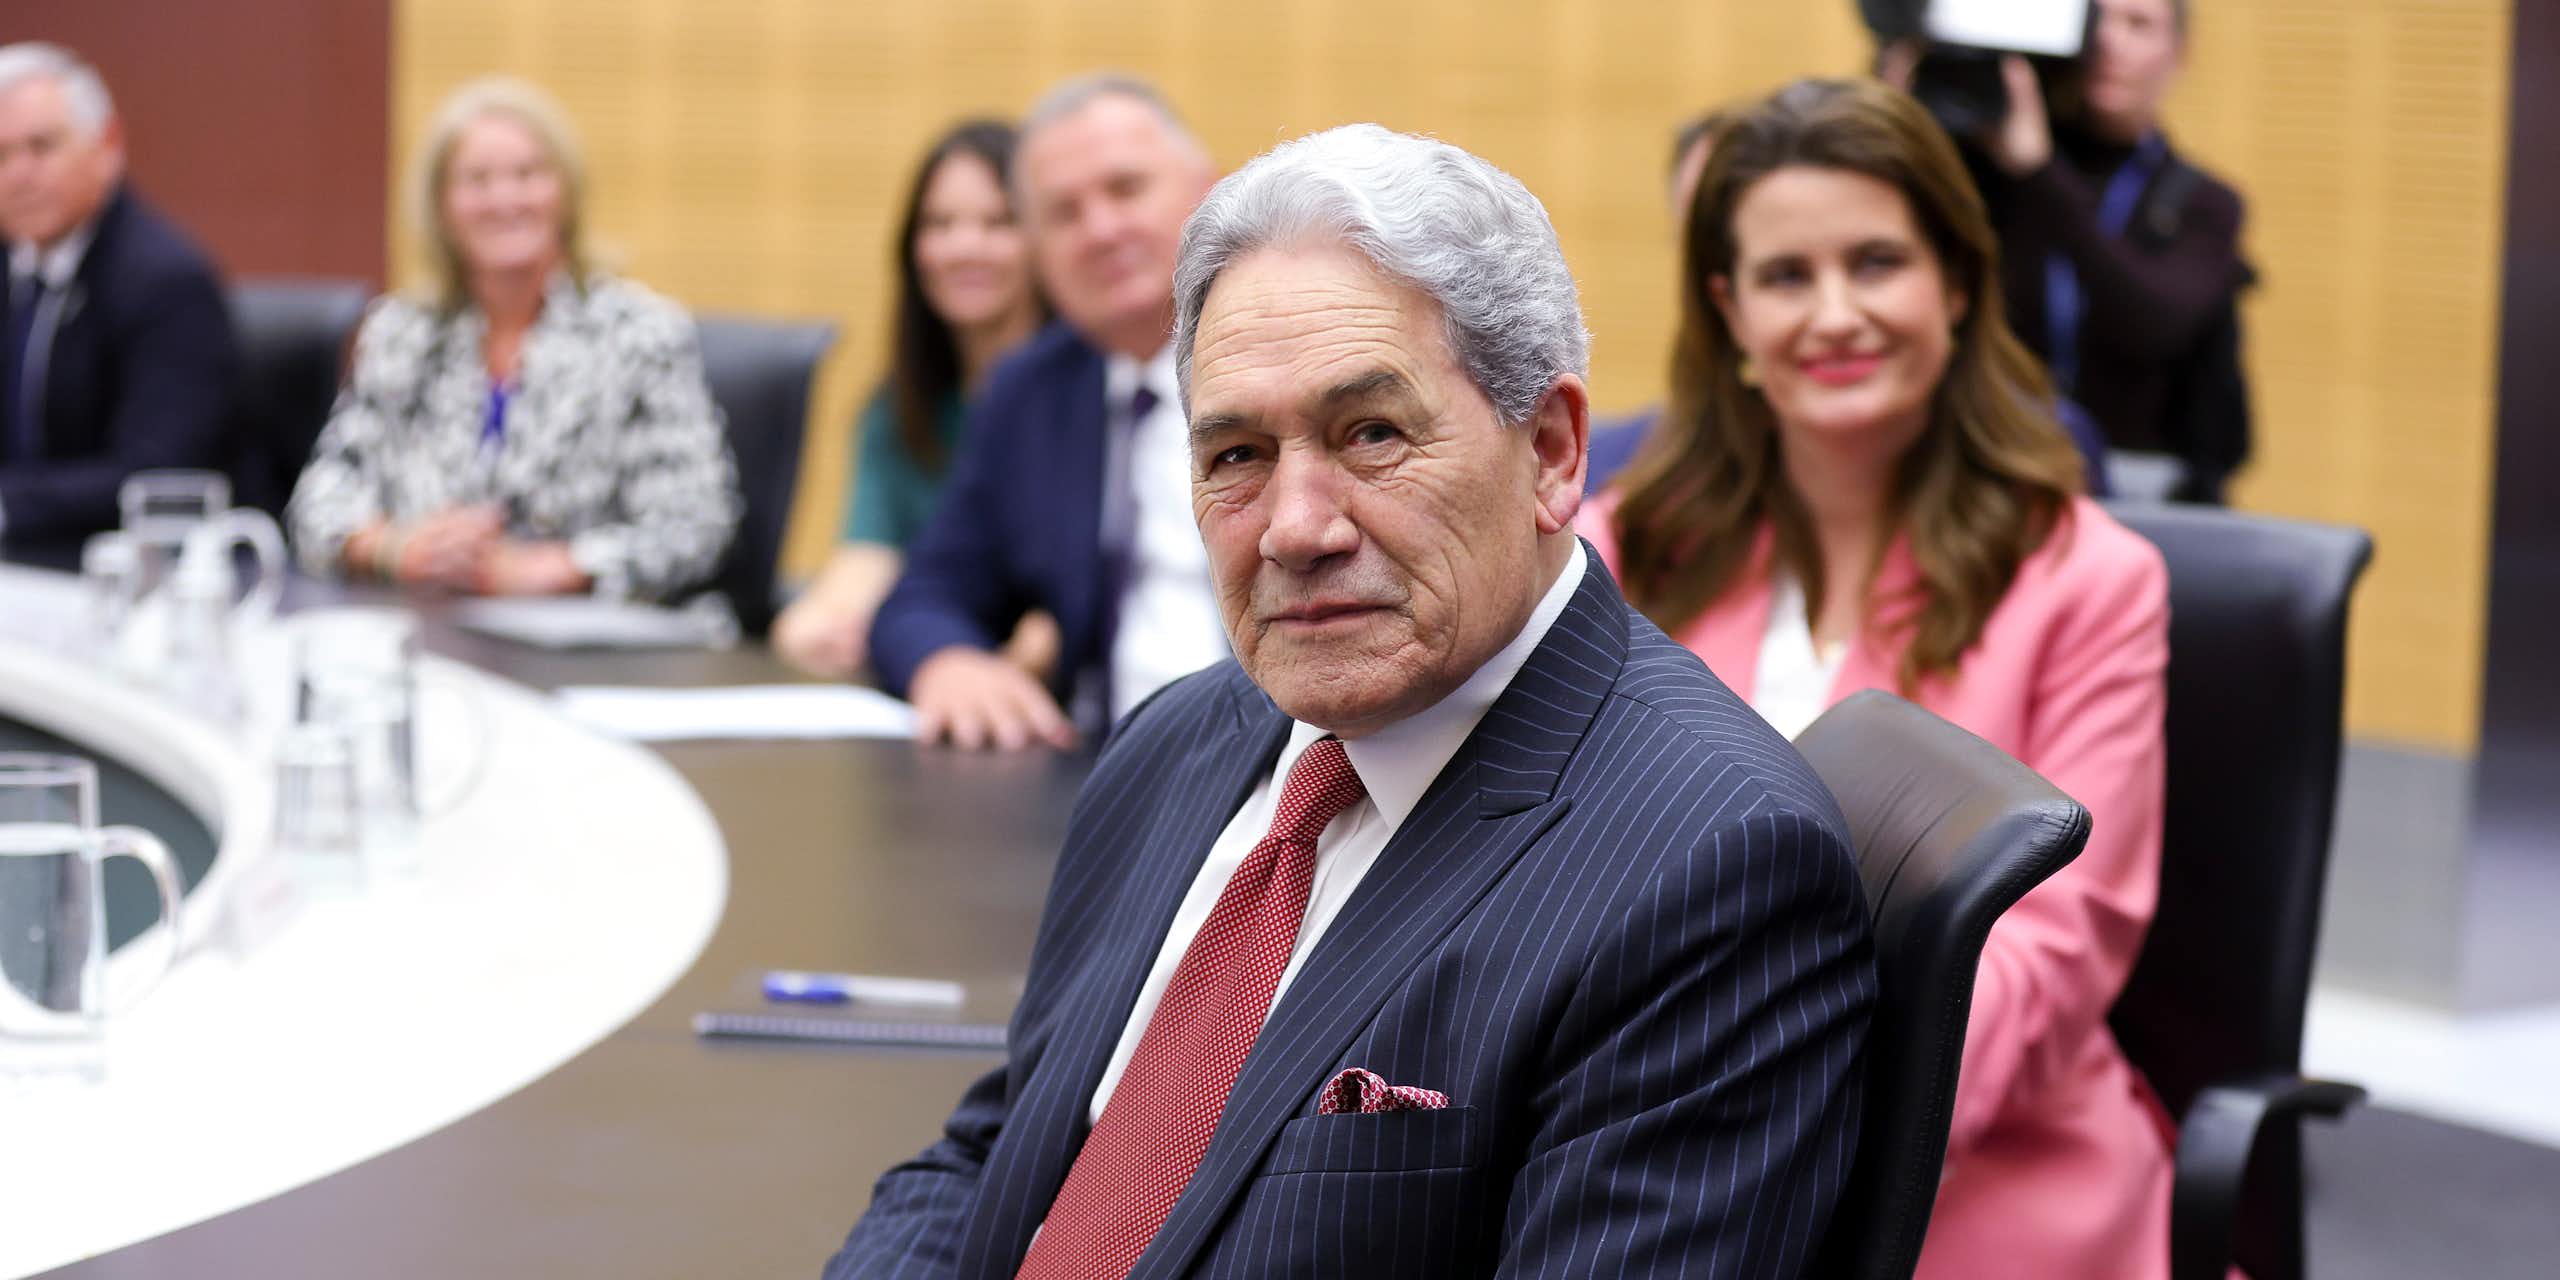 Is Winston Peters right to call state-funded journalism ‘bribery’ – or is there a bigger threat to democracy?